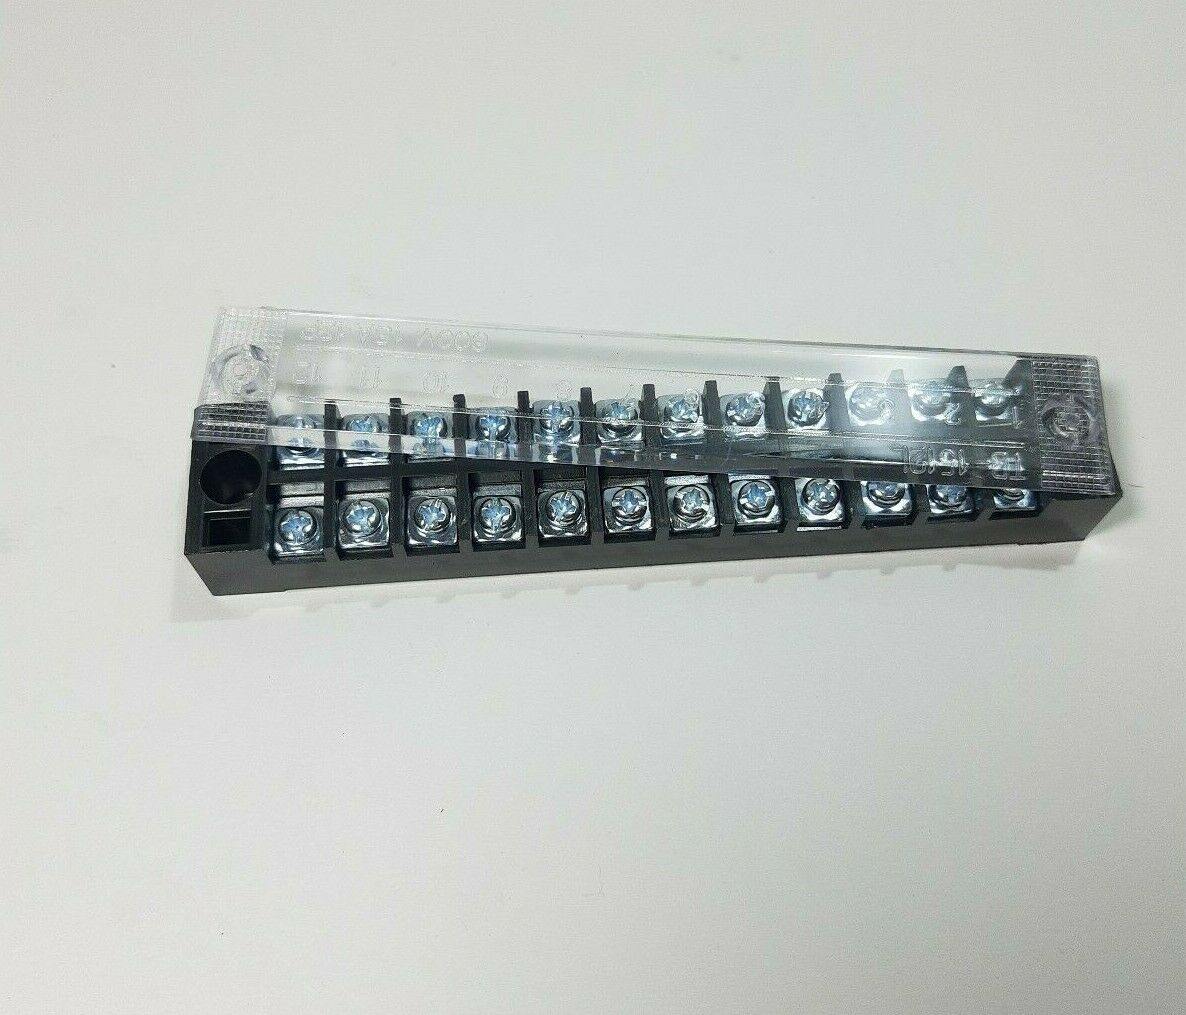 12V 24V 12 Position 2 Row Terminal Block Strip Cable Connector Mure Tb-1512L - Mid-Ulster Rotating Electrics Ltd